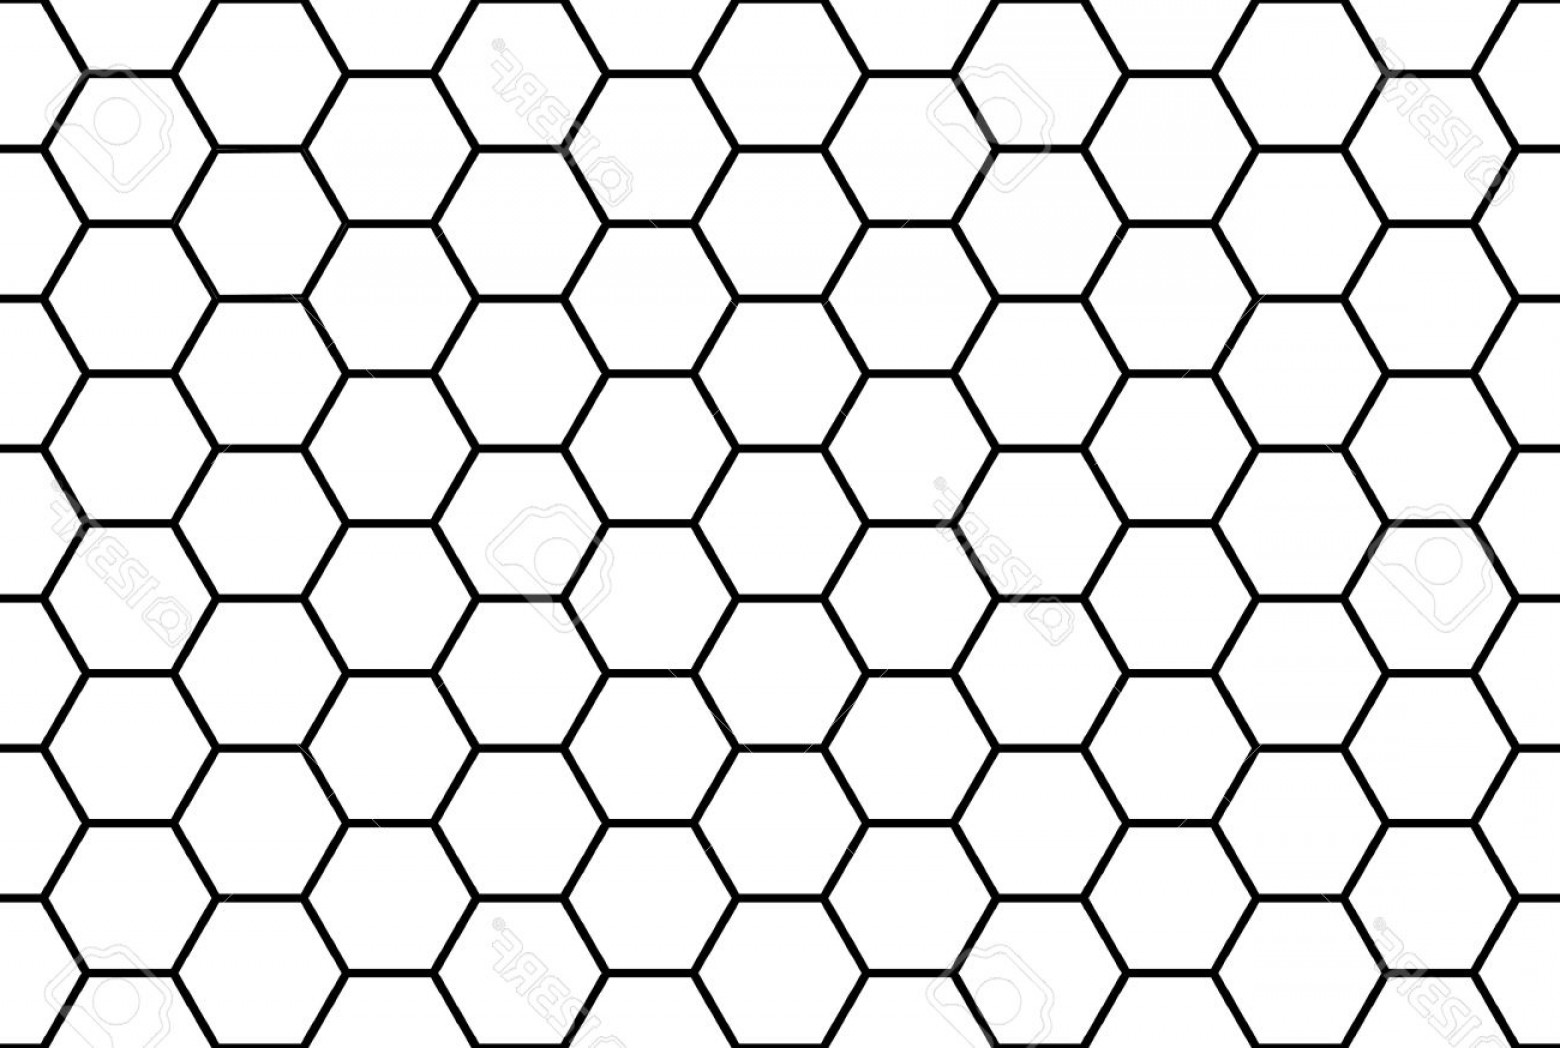 Black And White Honeycomb Vector